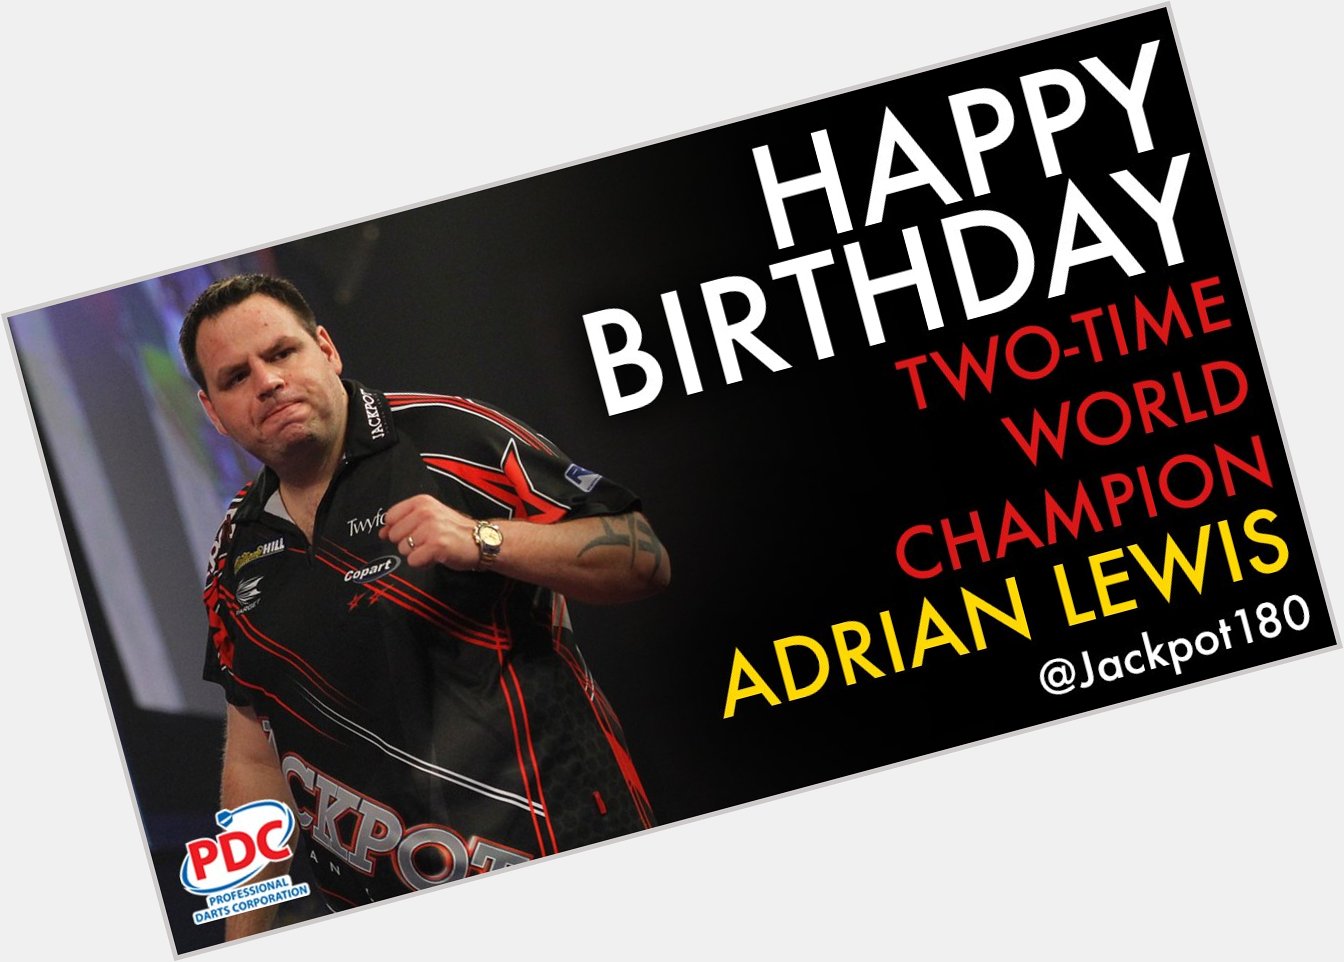 HAPPY BIRTHDAY to two-time World Champion Adrian Lewis, who turns 32 today. 